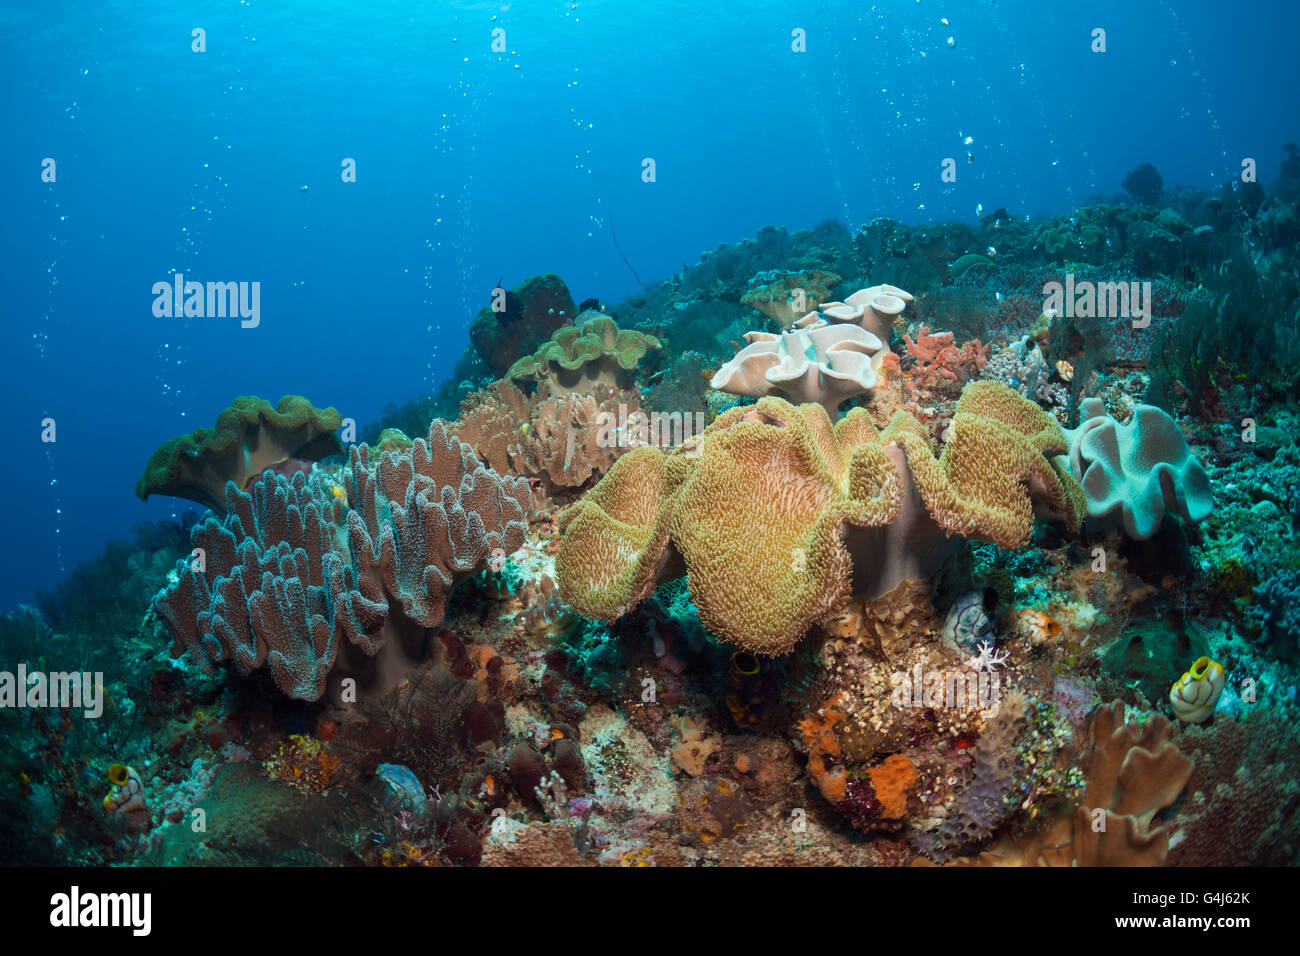 Volcanic Gas Bubbles in Coral Reef, Ambon, Moluccas, Indonesia Stock Photo